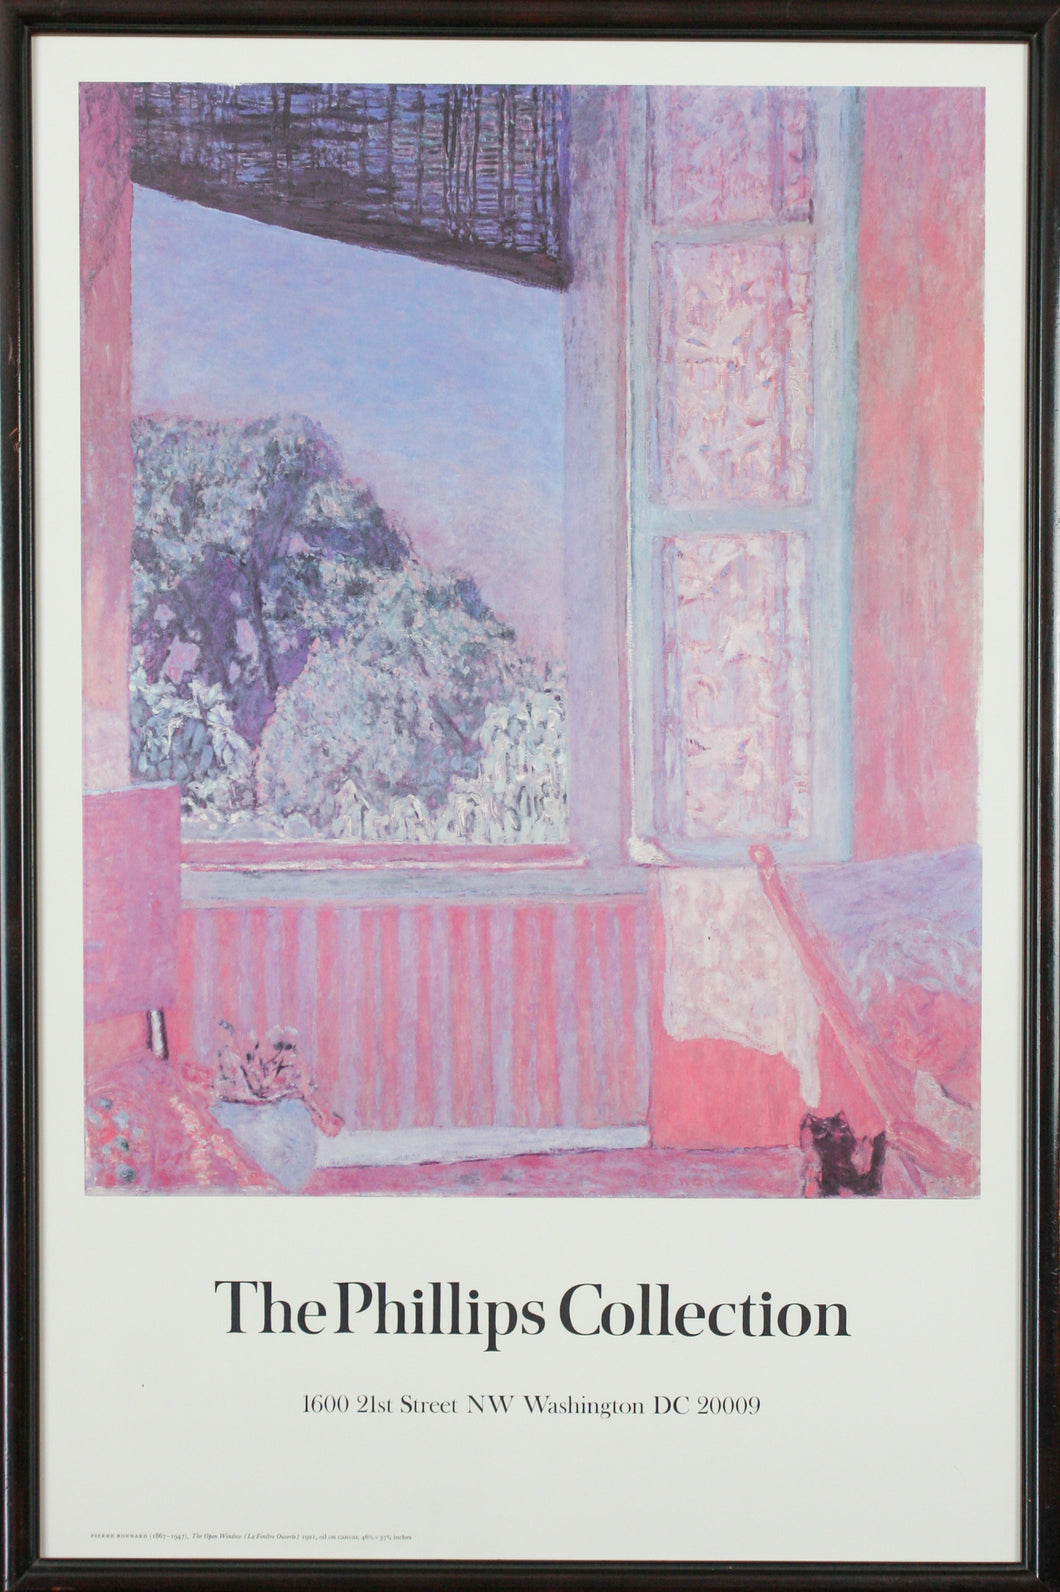 Pierre Bonnard. The Open Window. The Phillips Collection. Original Vintage Museum Poster. End 20th century.